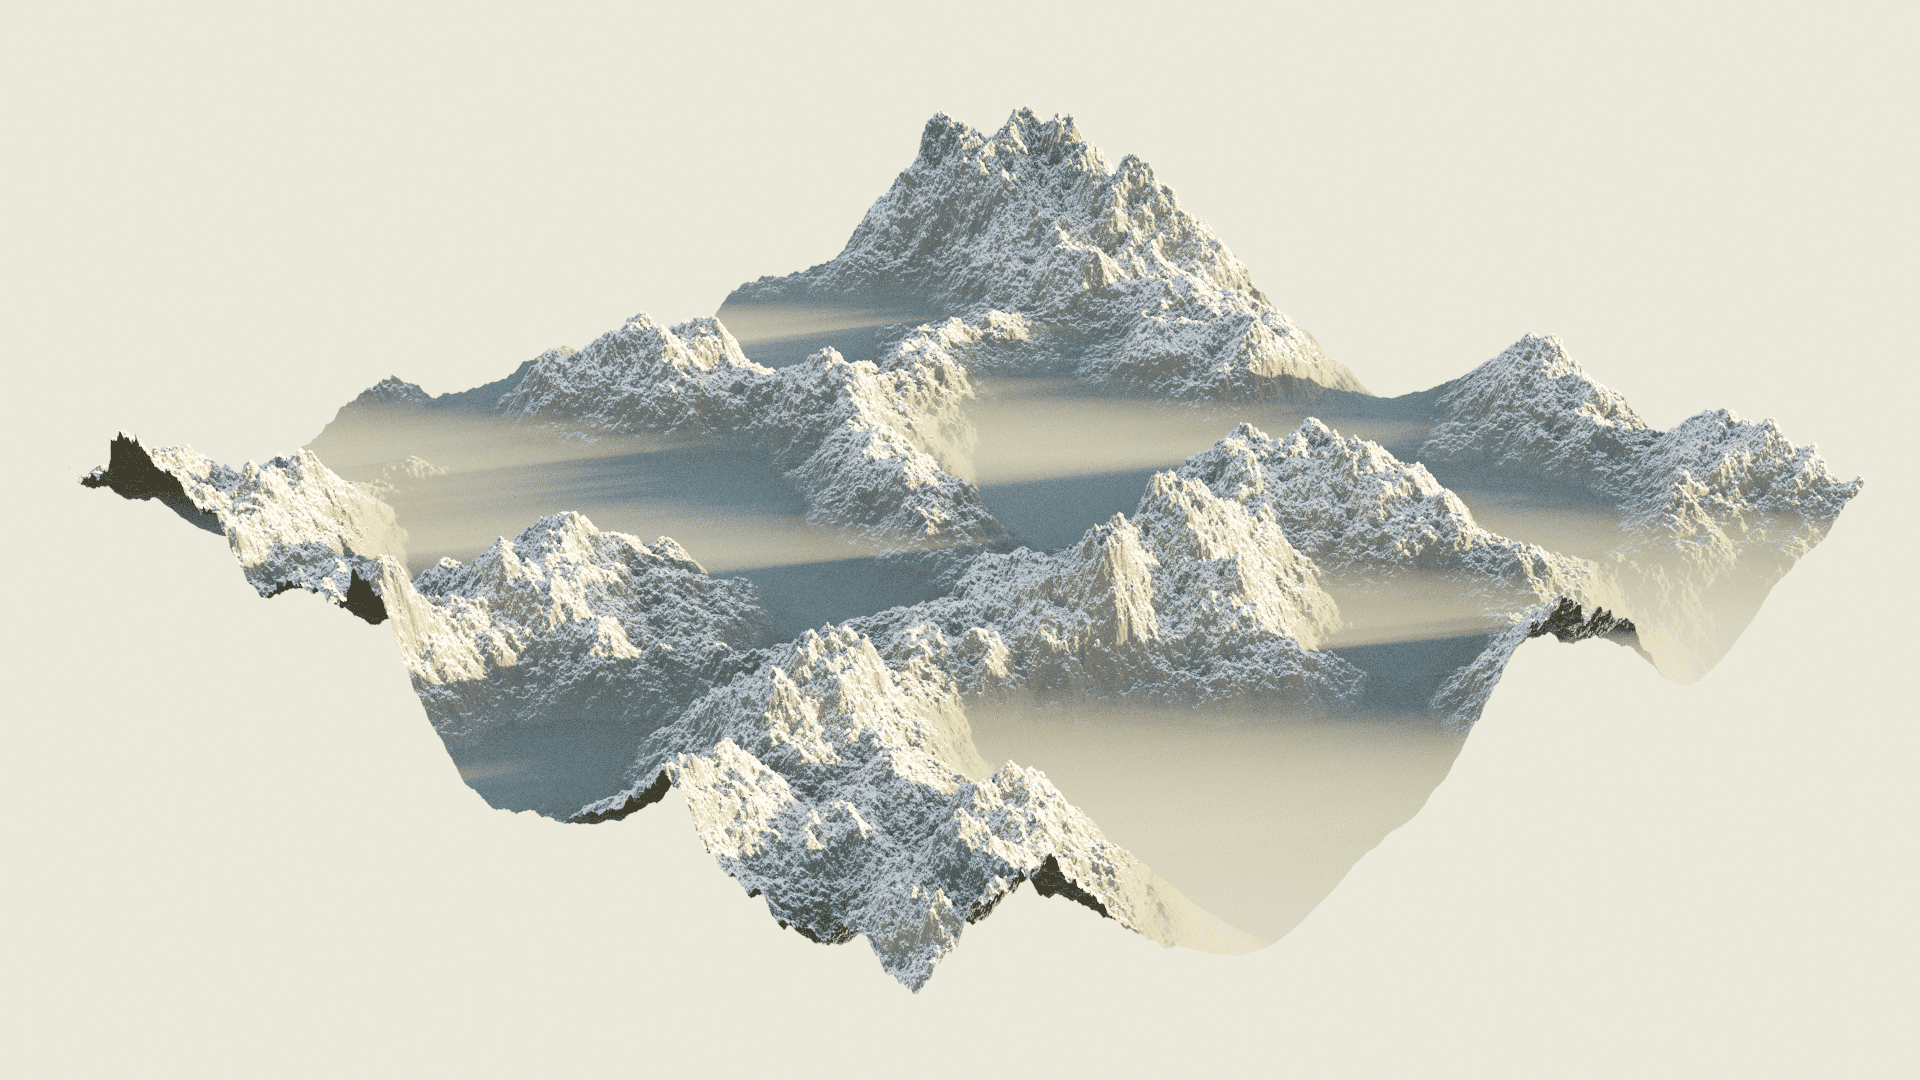 floating in the clouds, a chunk of terrain, the surface thin like paper: snowtop mountains cutting through the mist